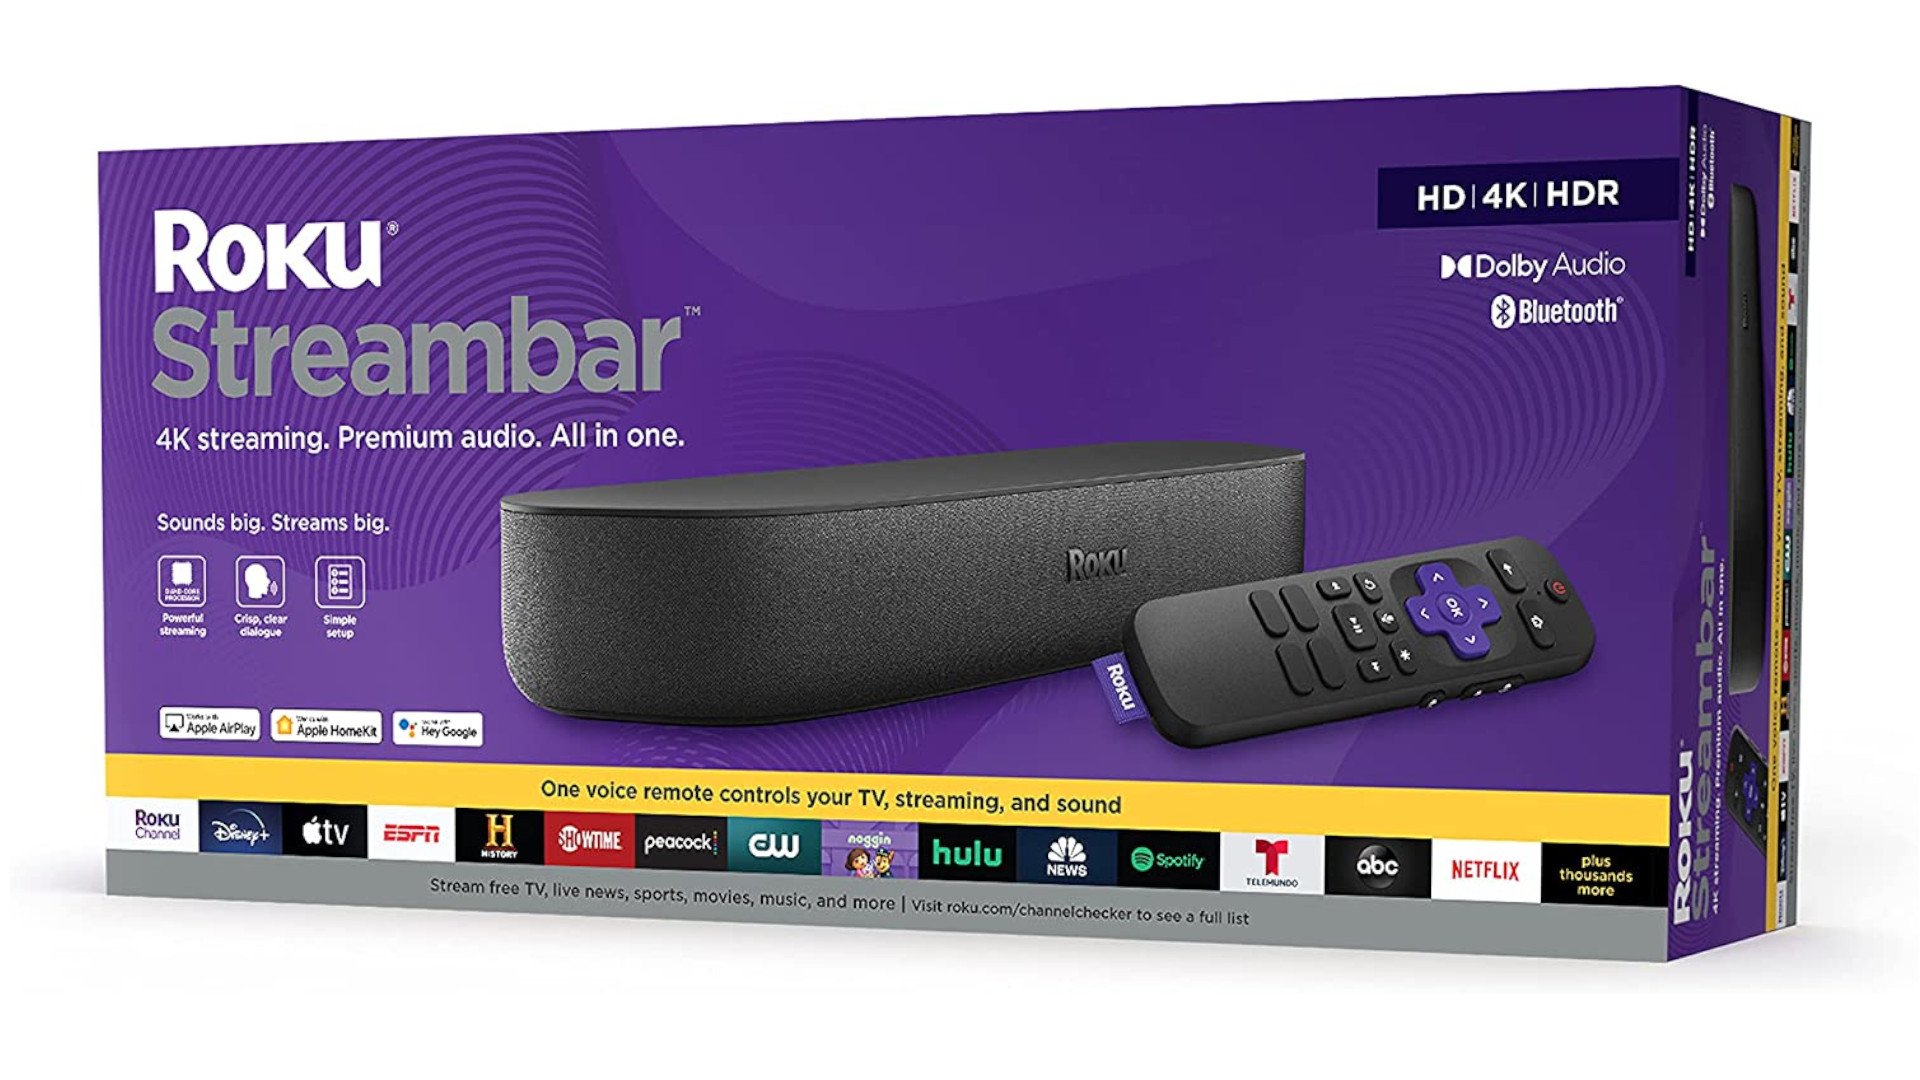 Black Friday and Cyber Monday deals: Roku Streambar